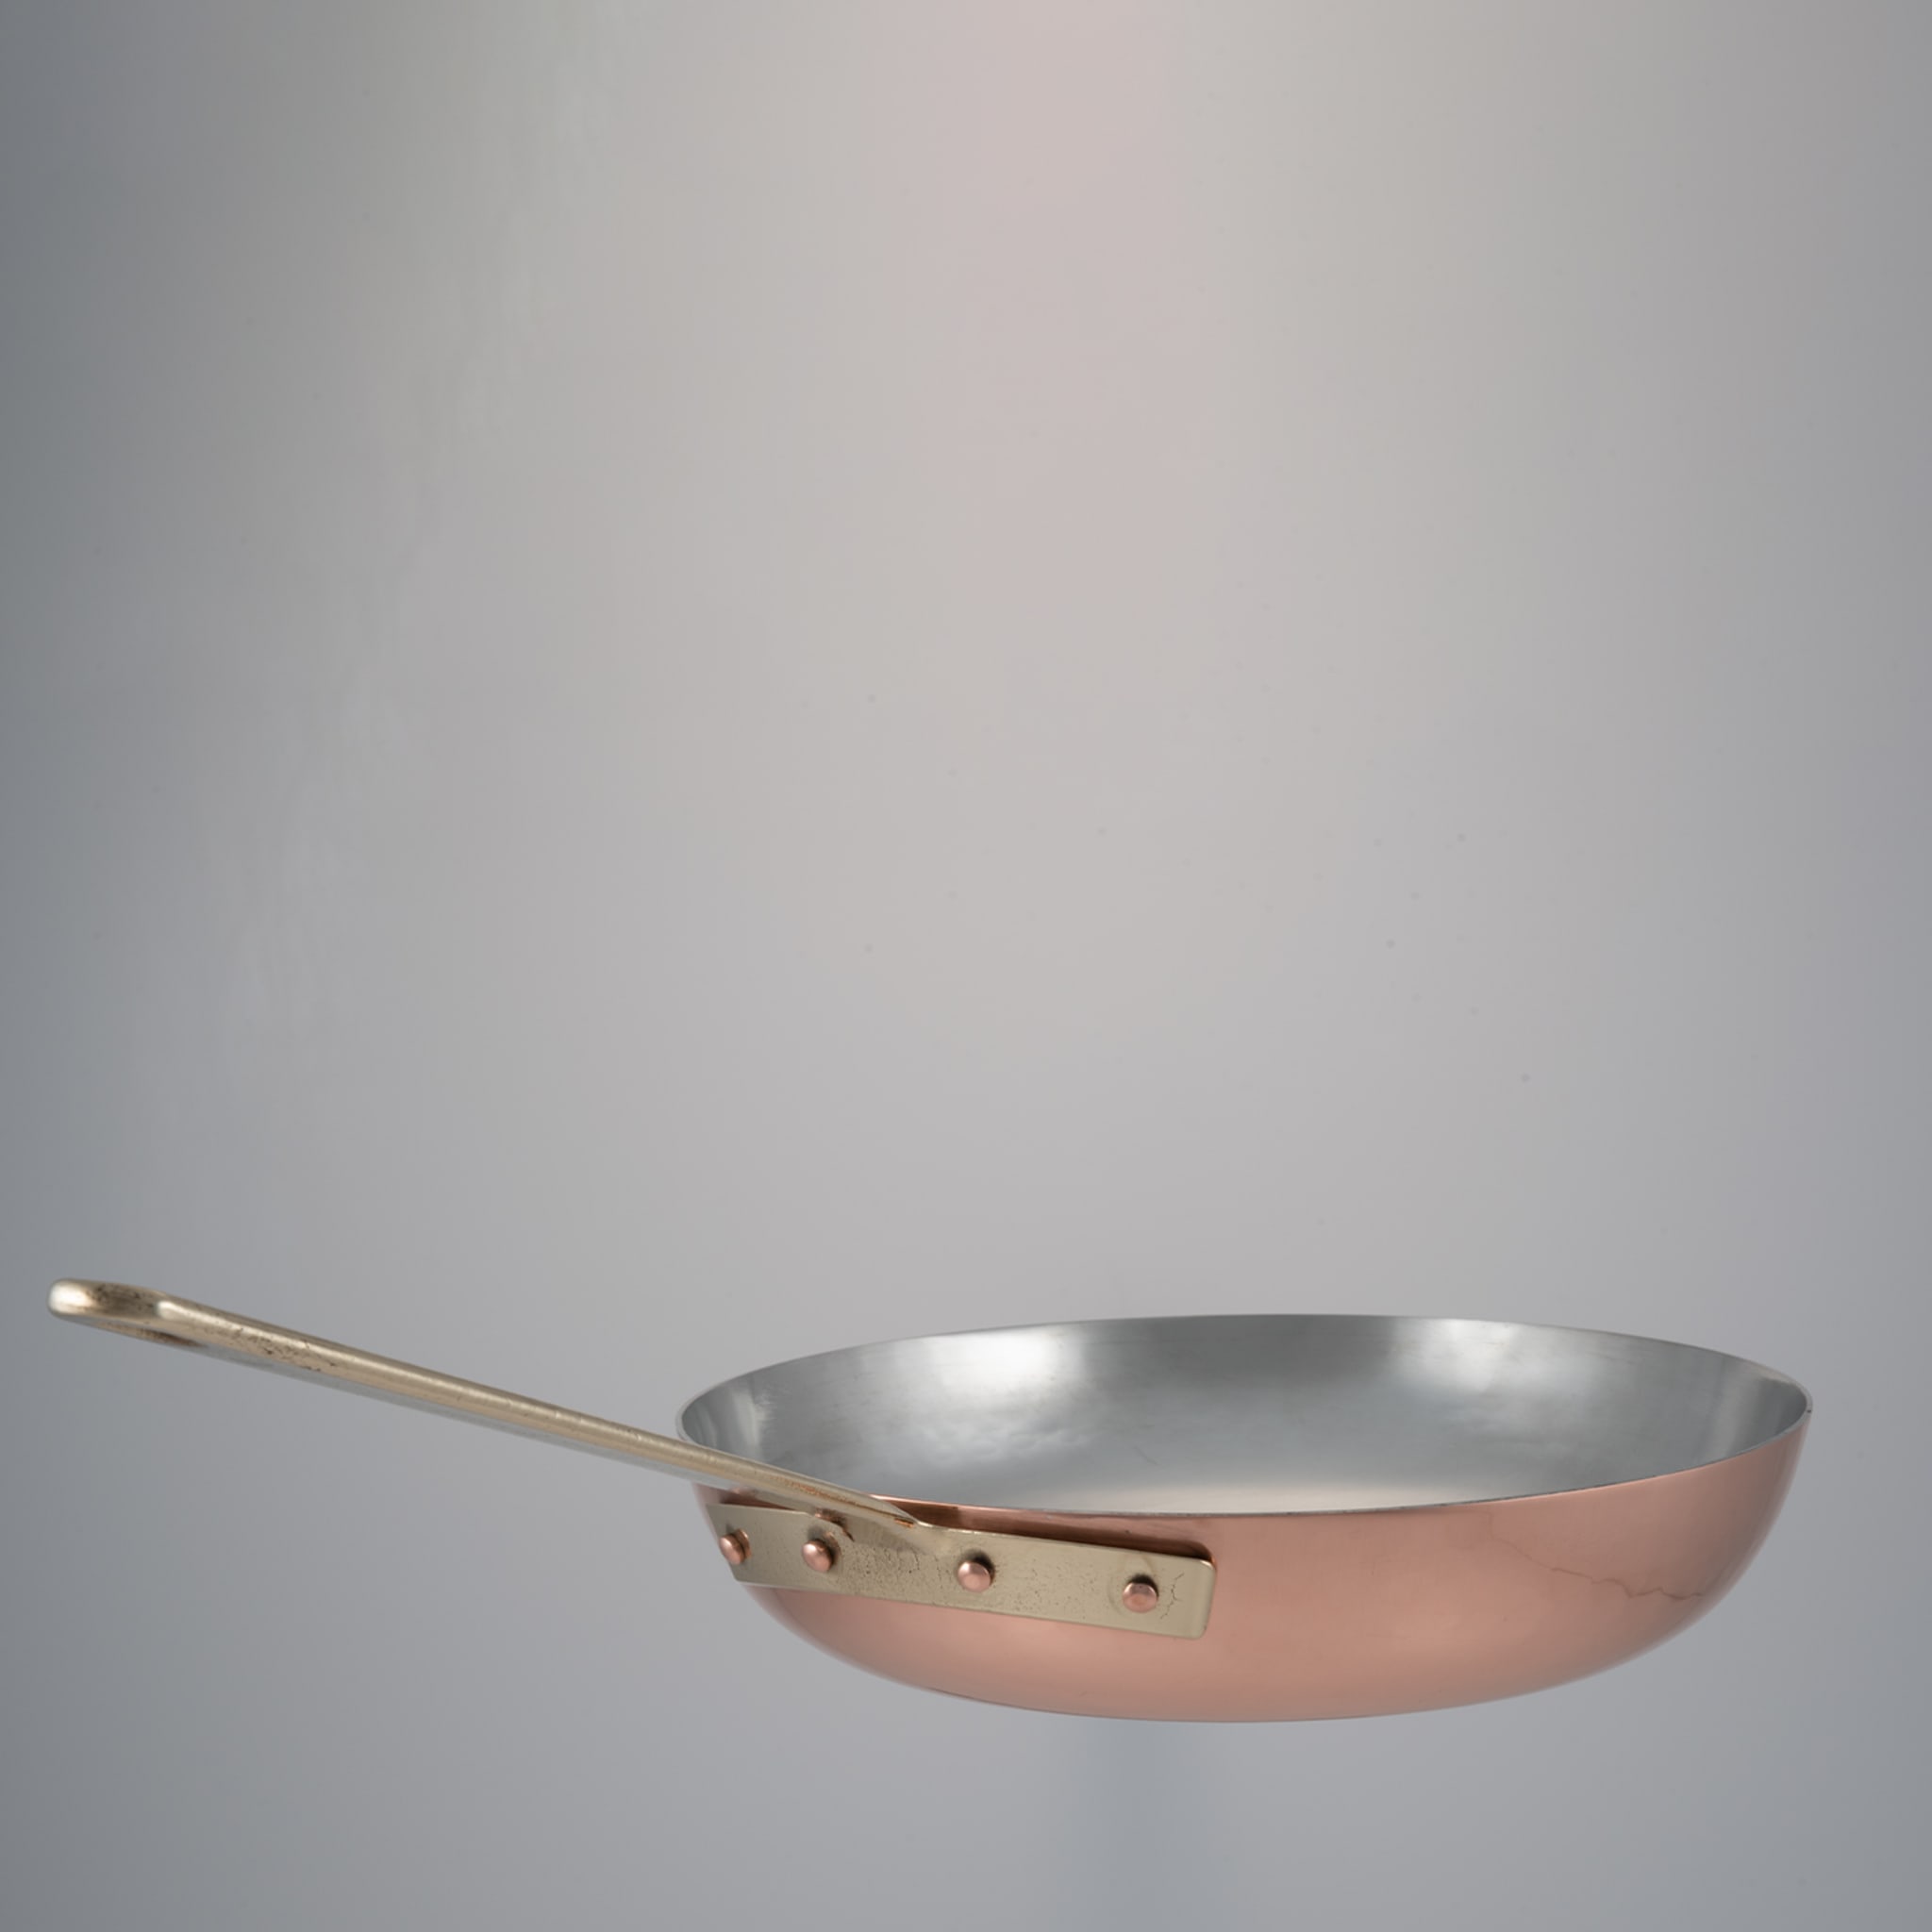 Silver Lined Bulging Copper Pan - Alternative view 1